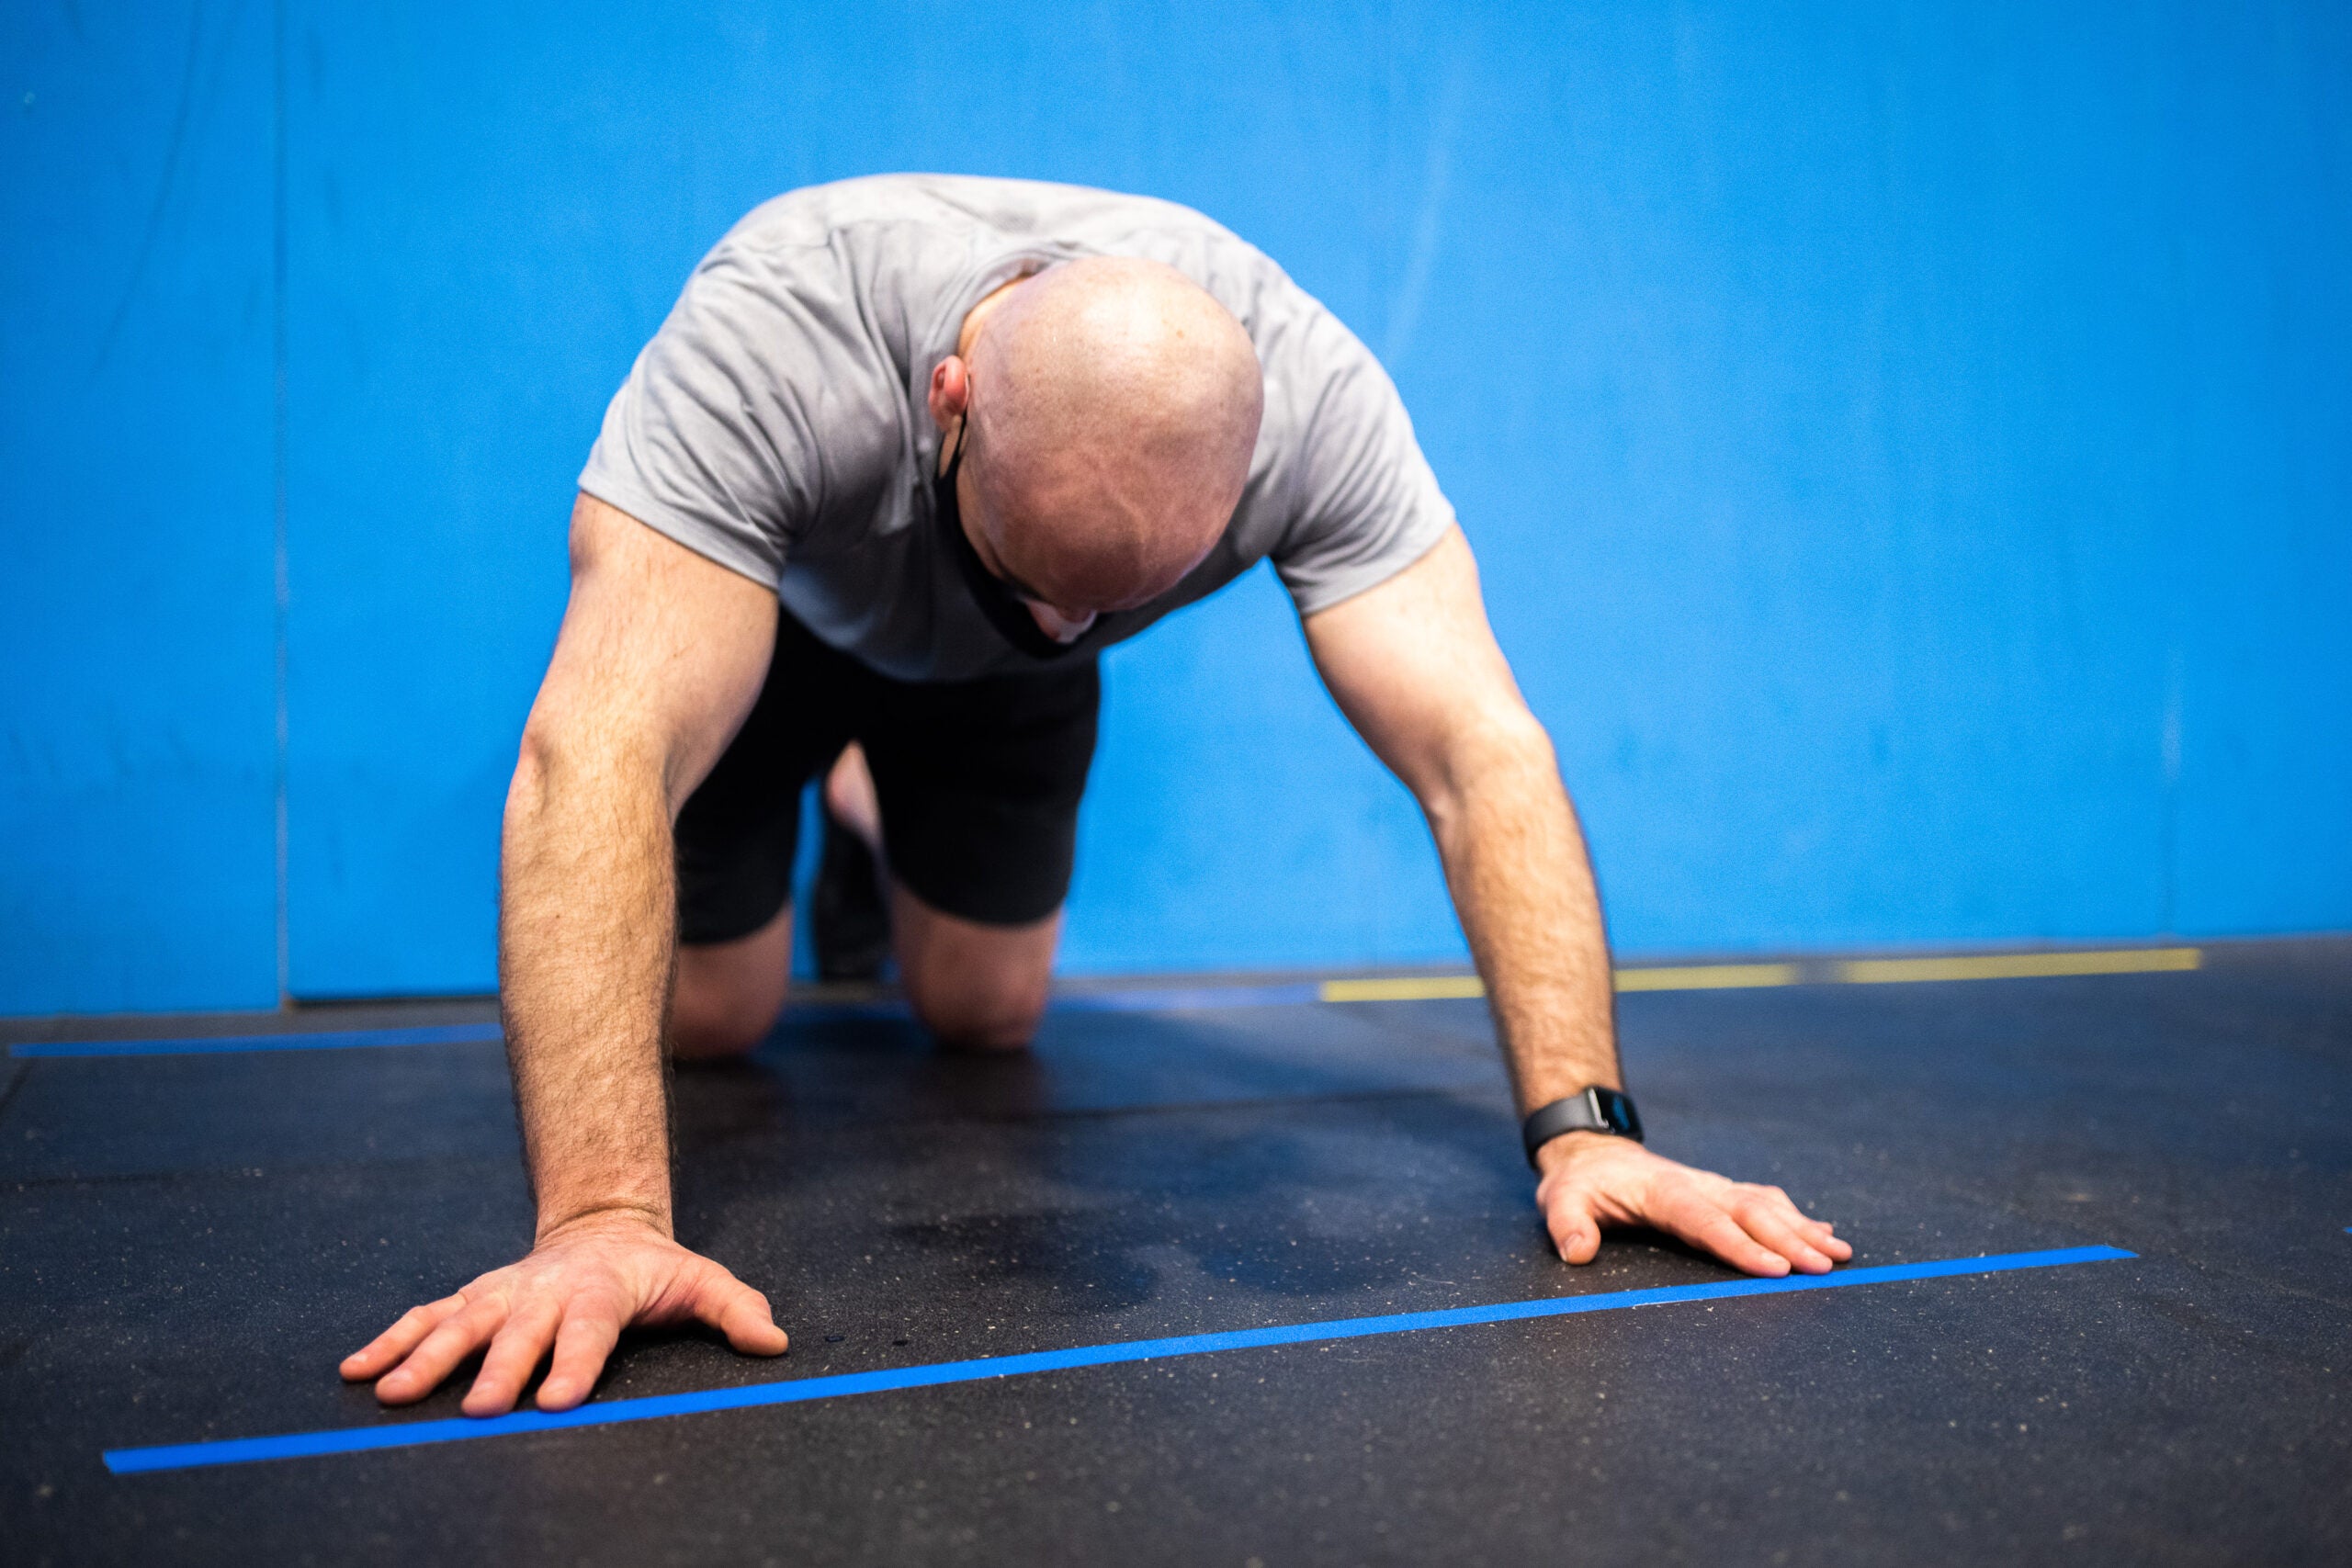 A man on hands and knees on an exercise mat, doing push ups